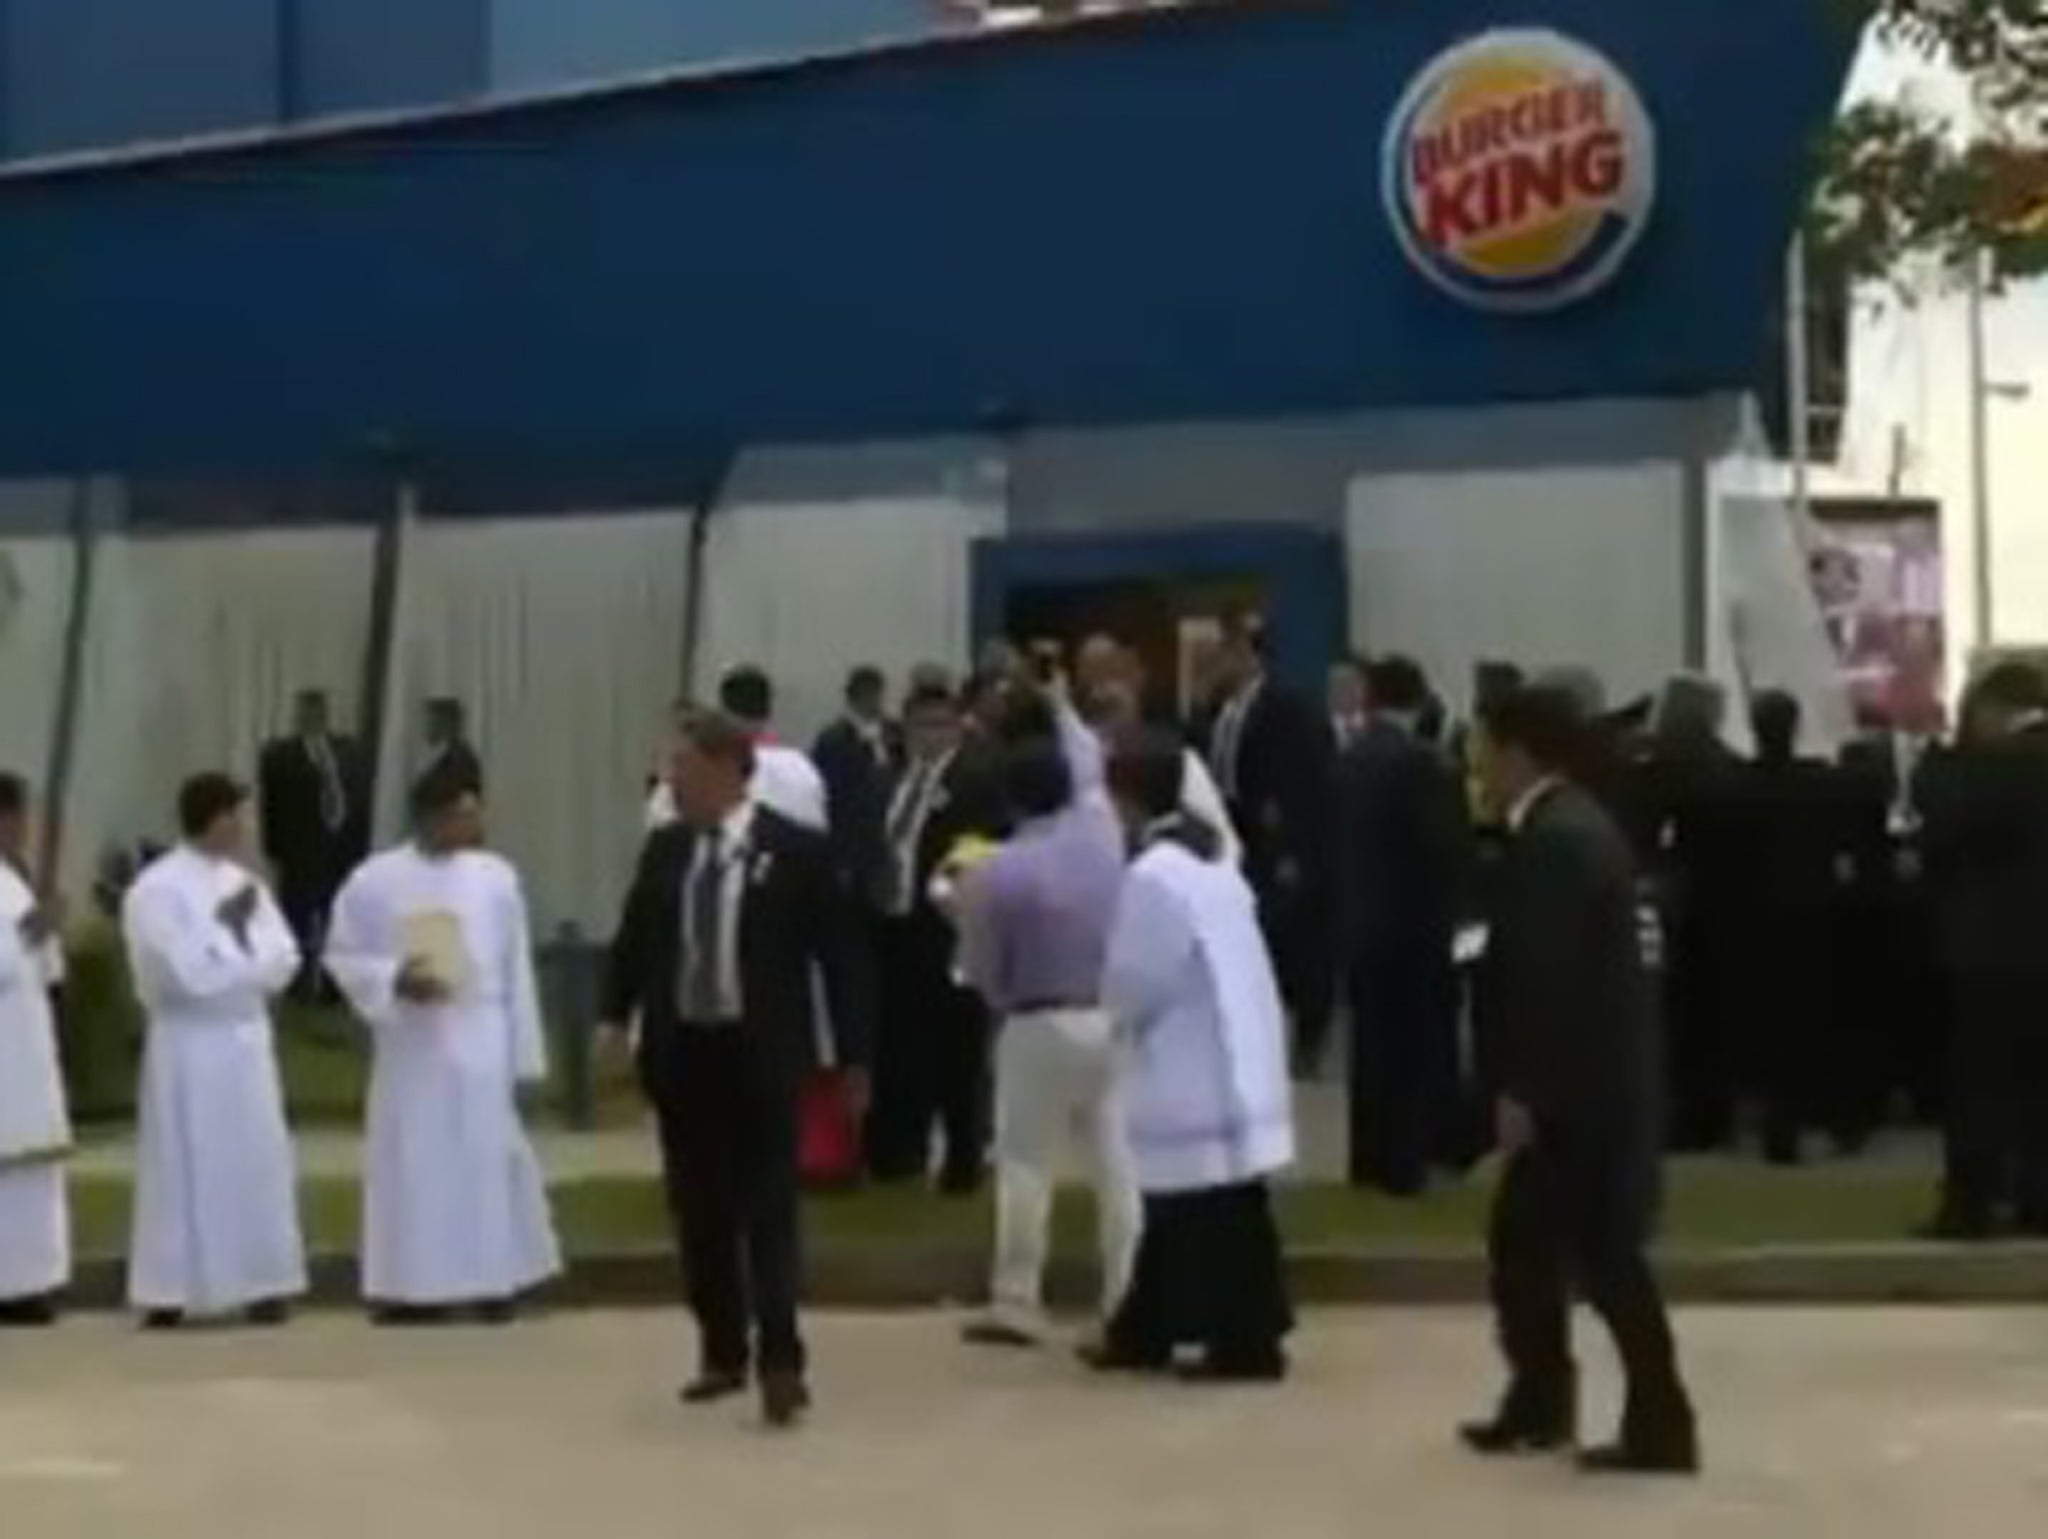 Pope Francis makes a pit stop at a Burger King in Bolivia